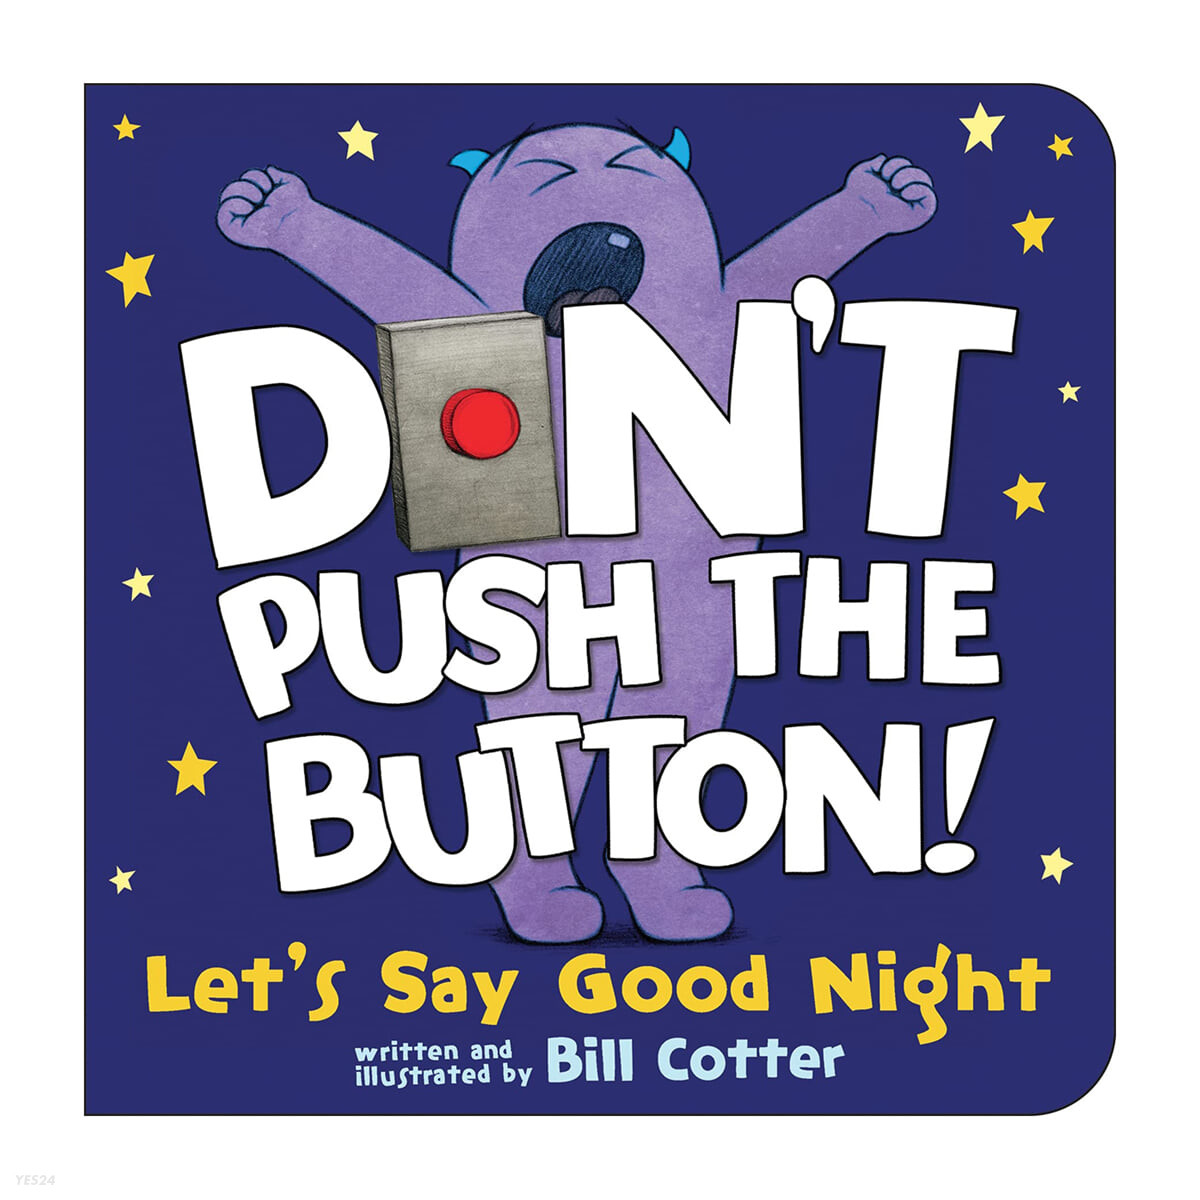 Don't <span>p</span>ush the button! : Let's say good night